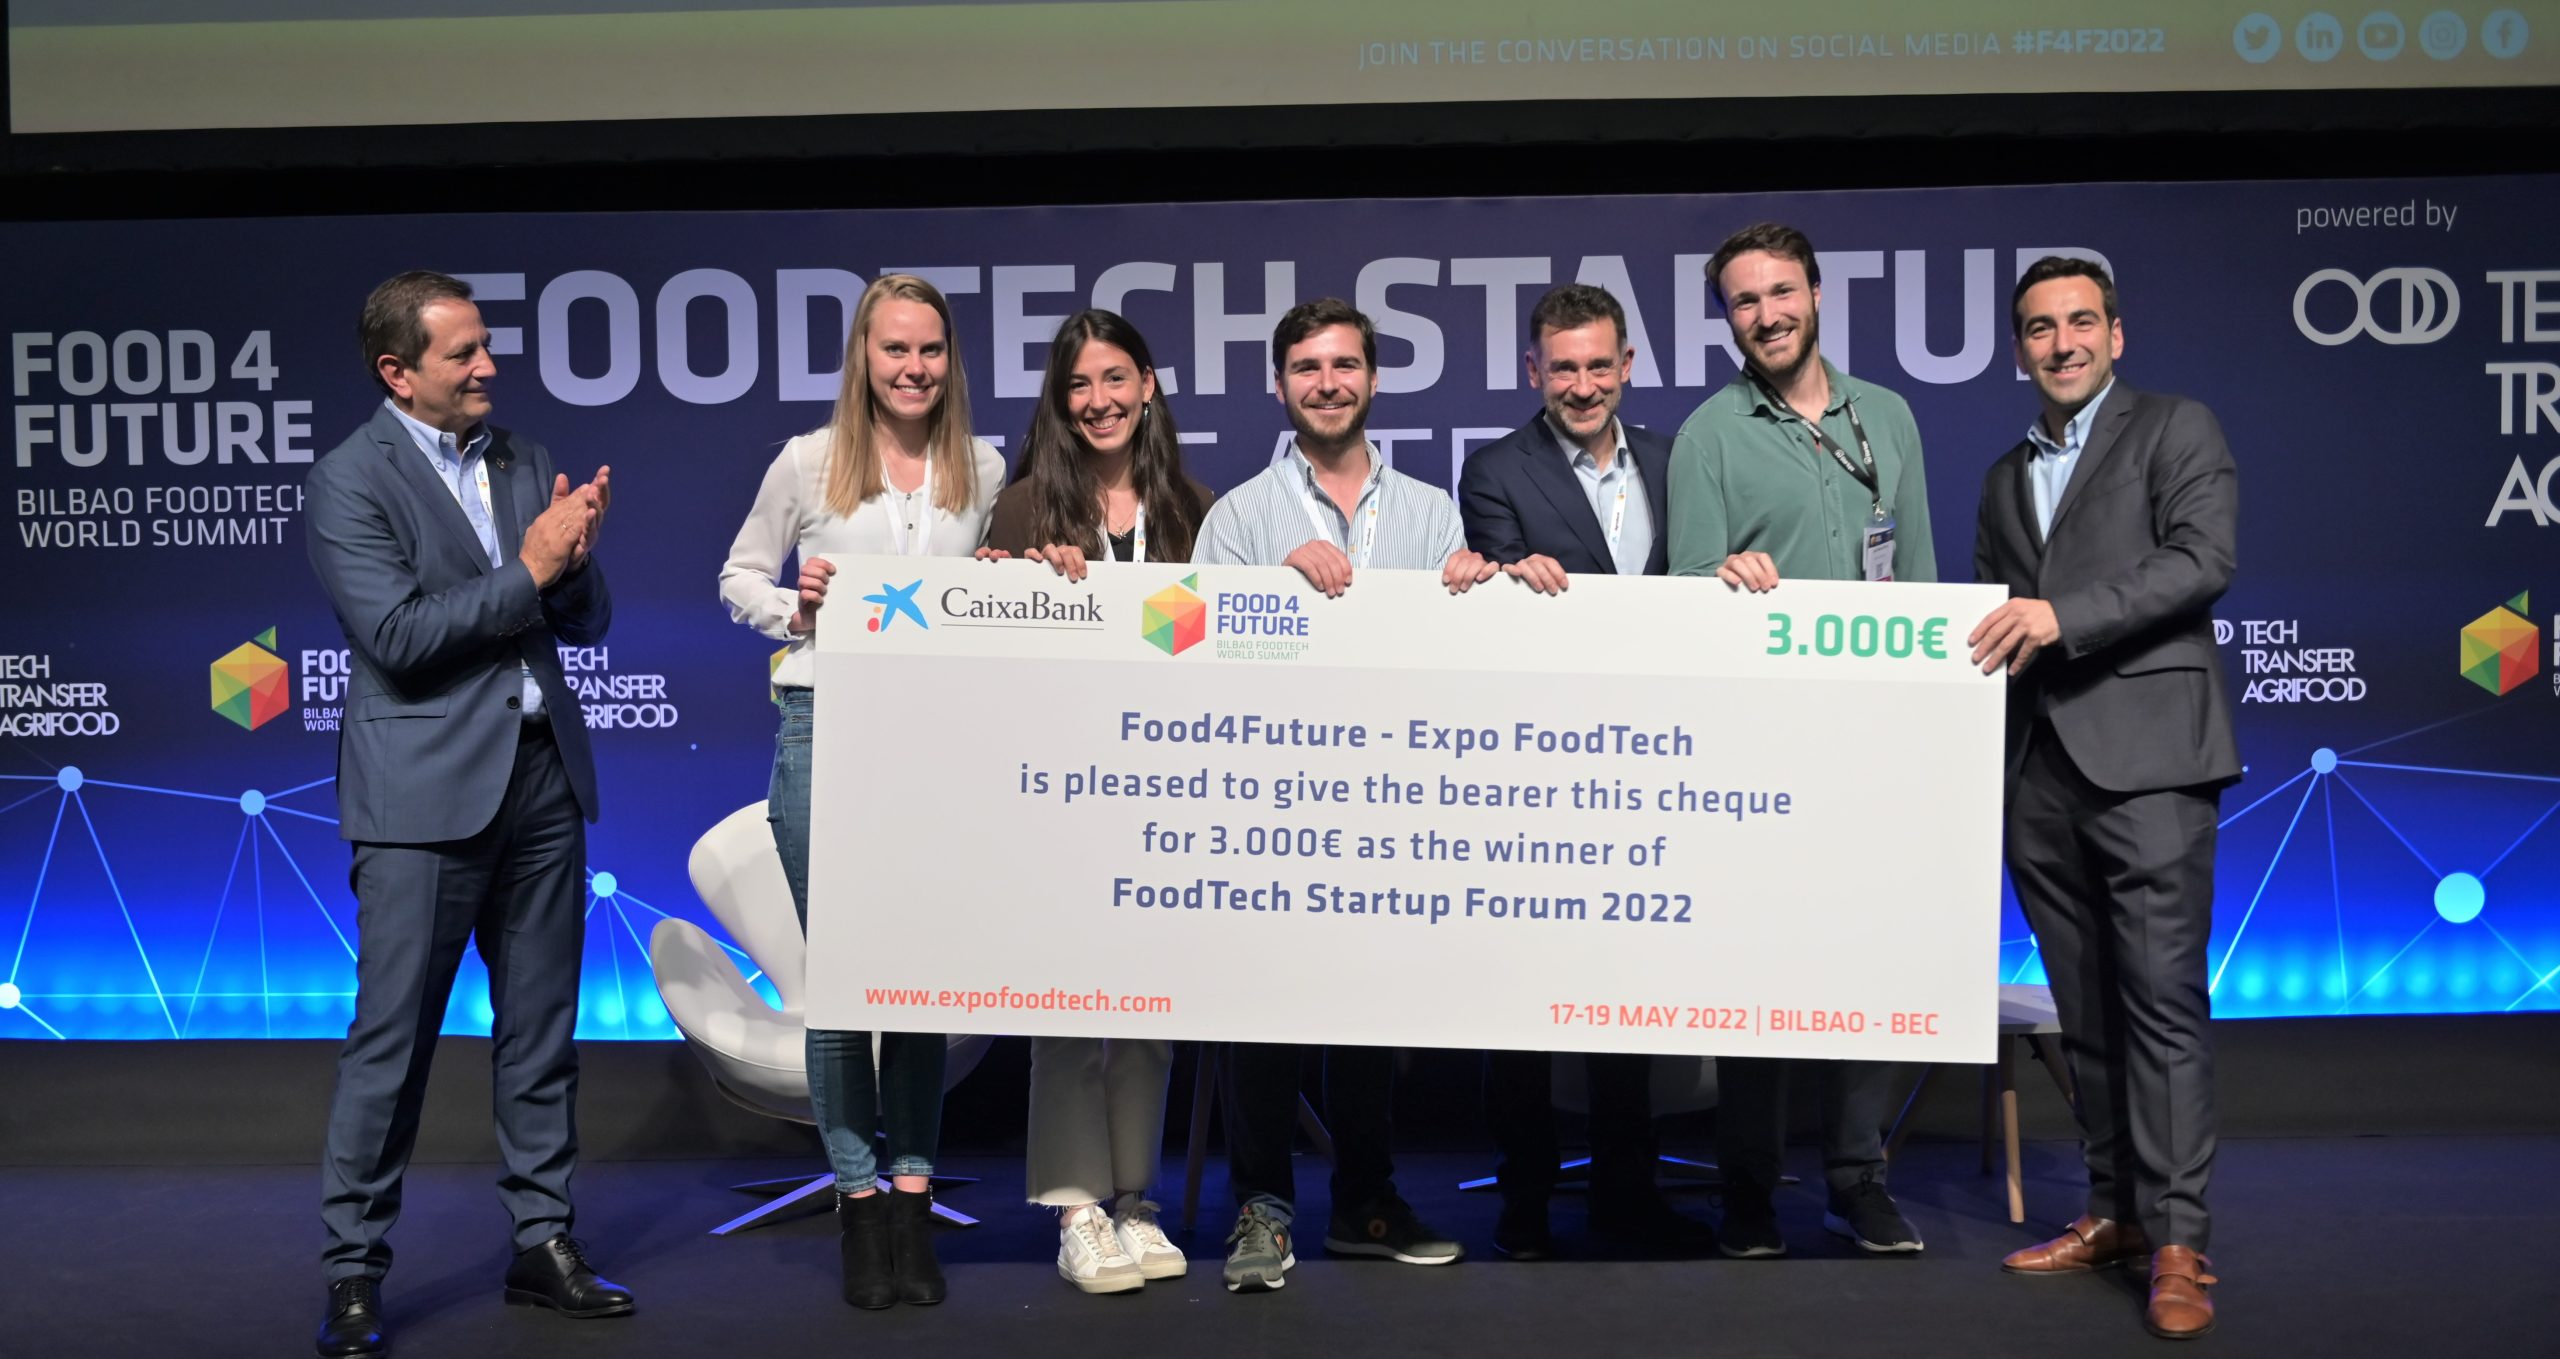 The Foodtech Startup Forum 2023 brings together the world's leading venture capital funds to reveal the latest trends in foodtech investment